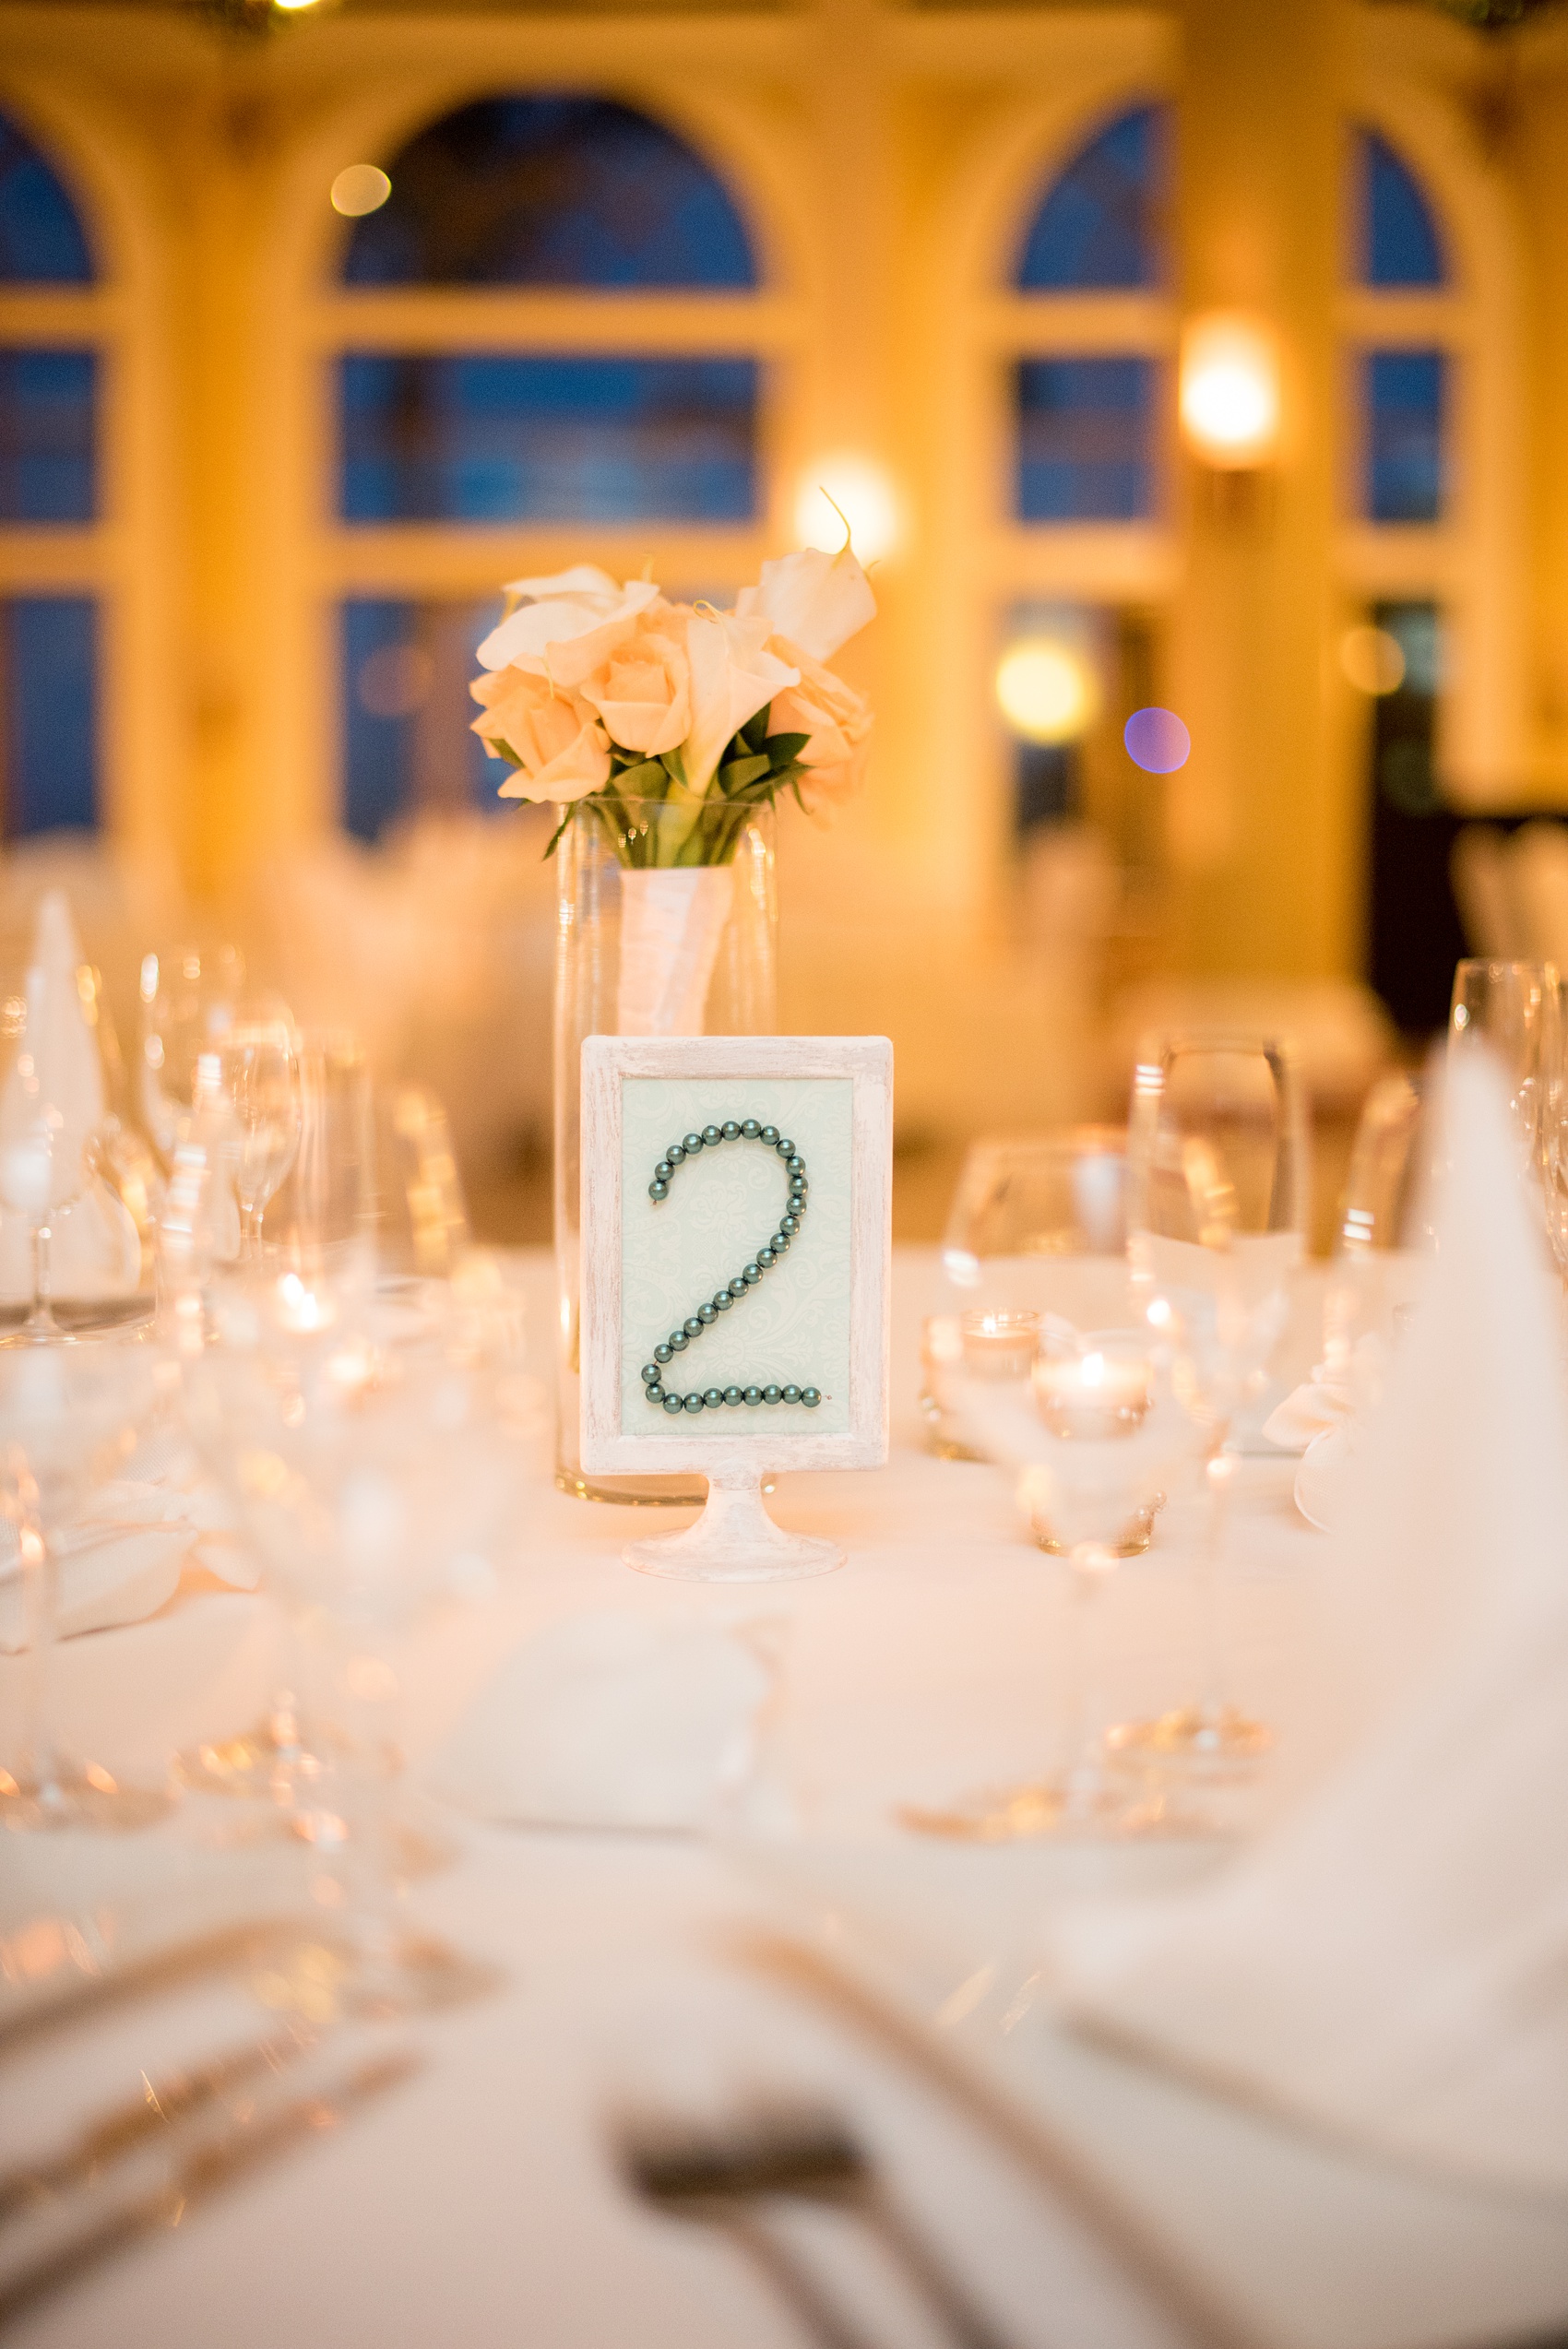 Mikkel Paige Photography photos from a wedding at Grand Paraiso, Mexico, Playa del Carmen Iberostar resort. Detail picture of the pearl and driftwood frame table number during the reception.